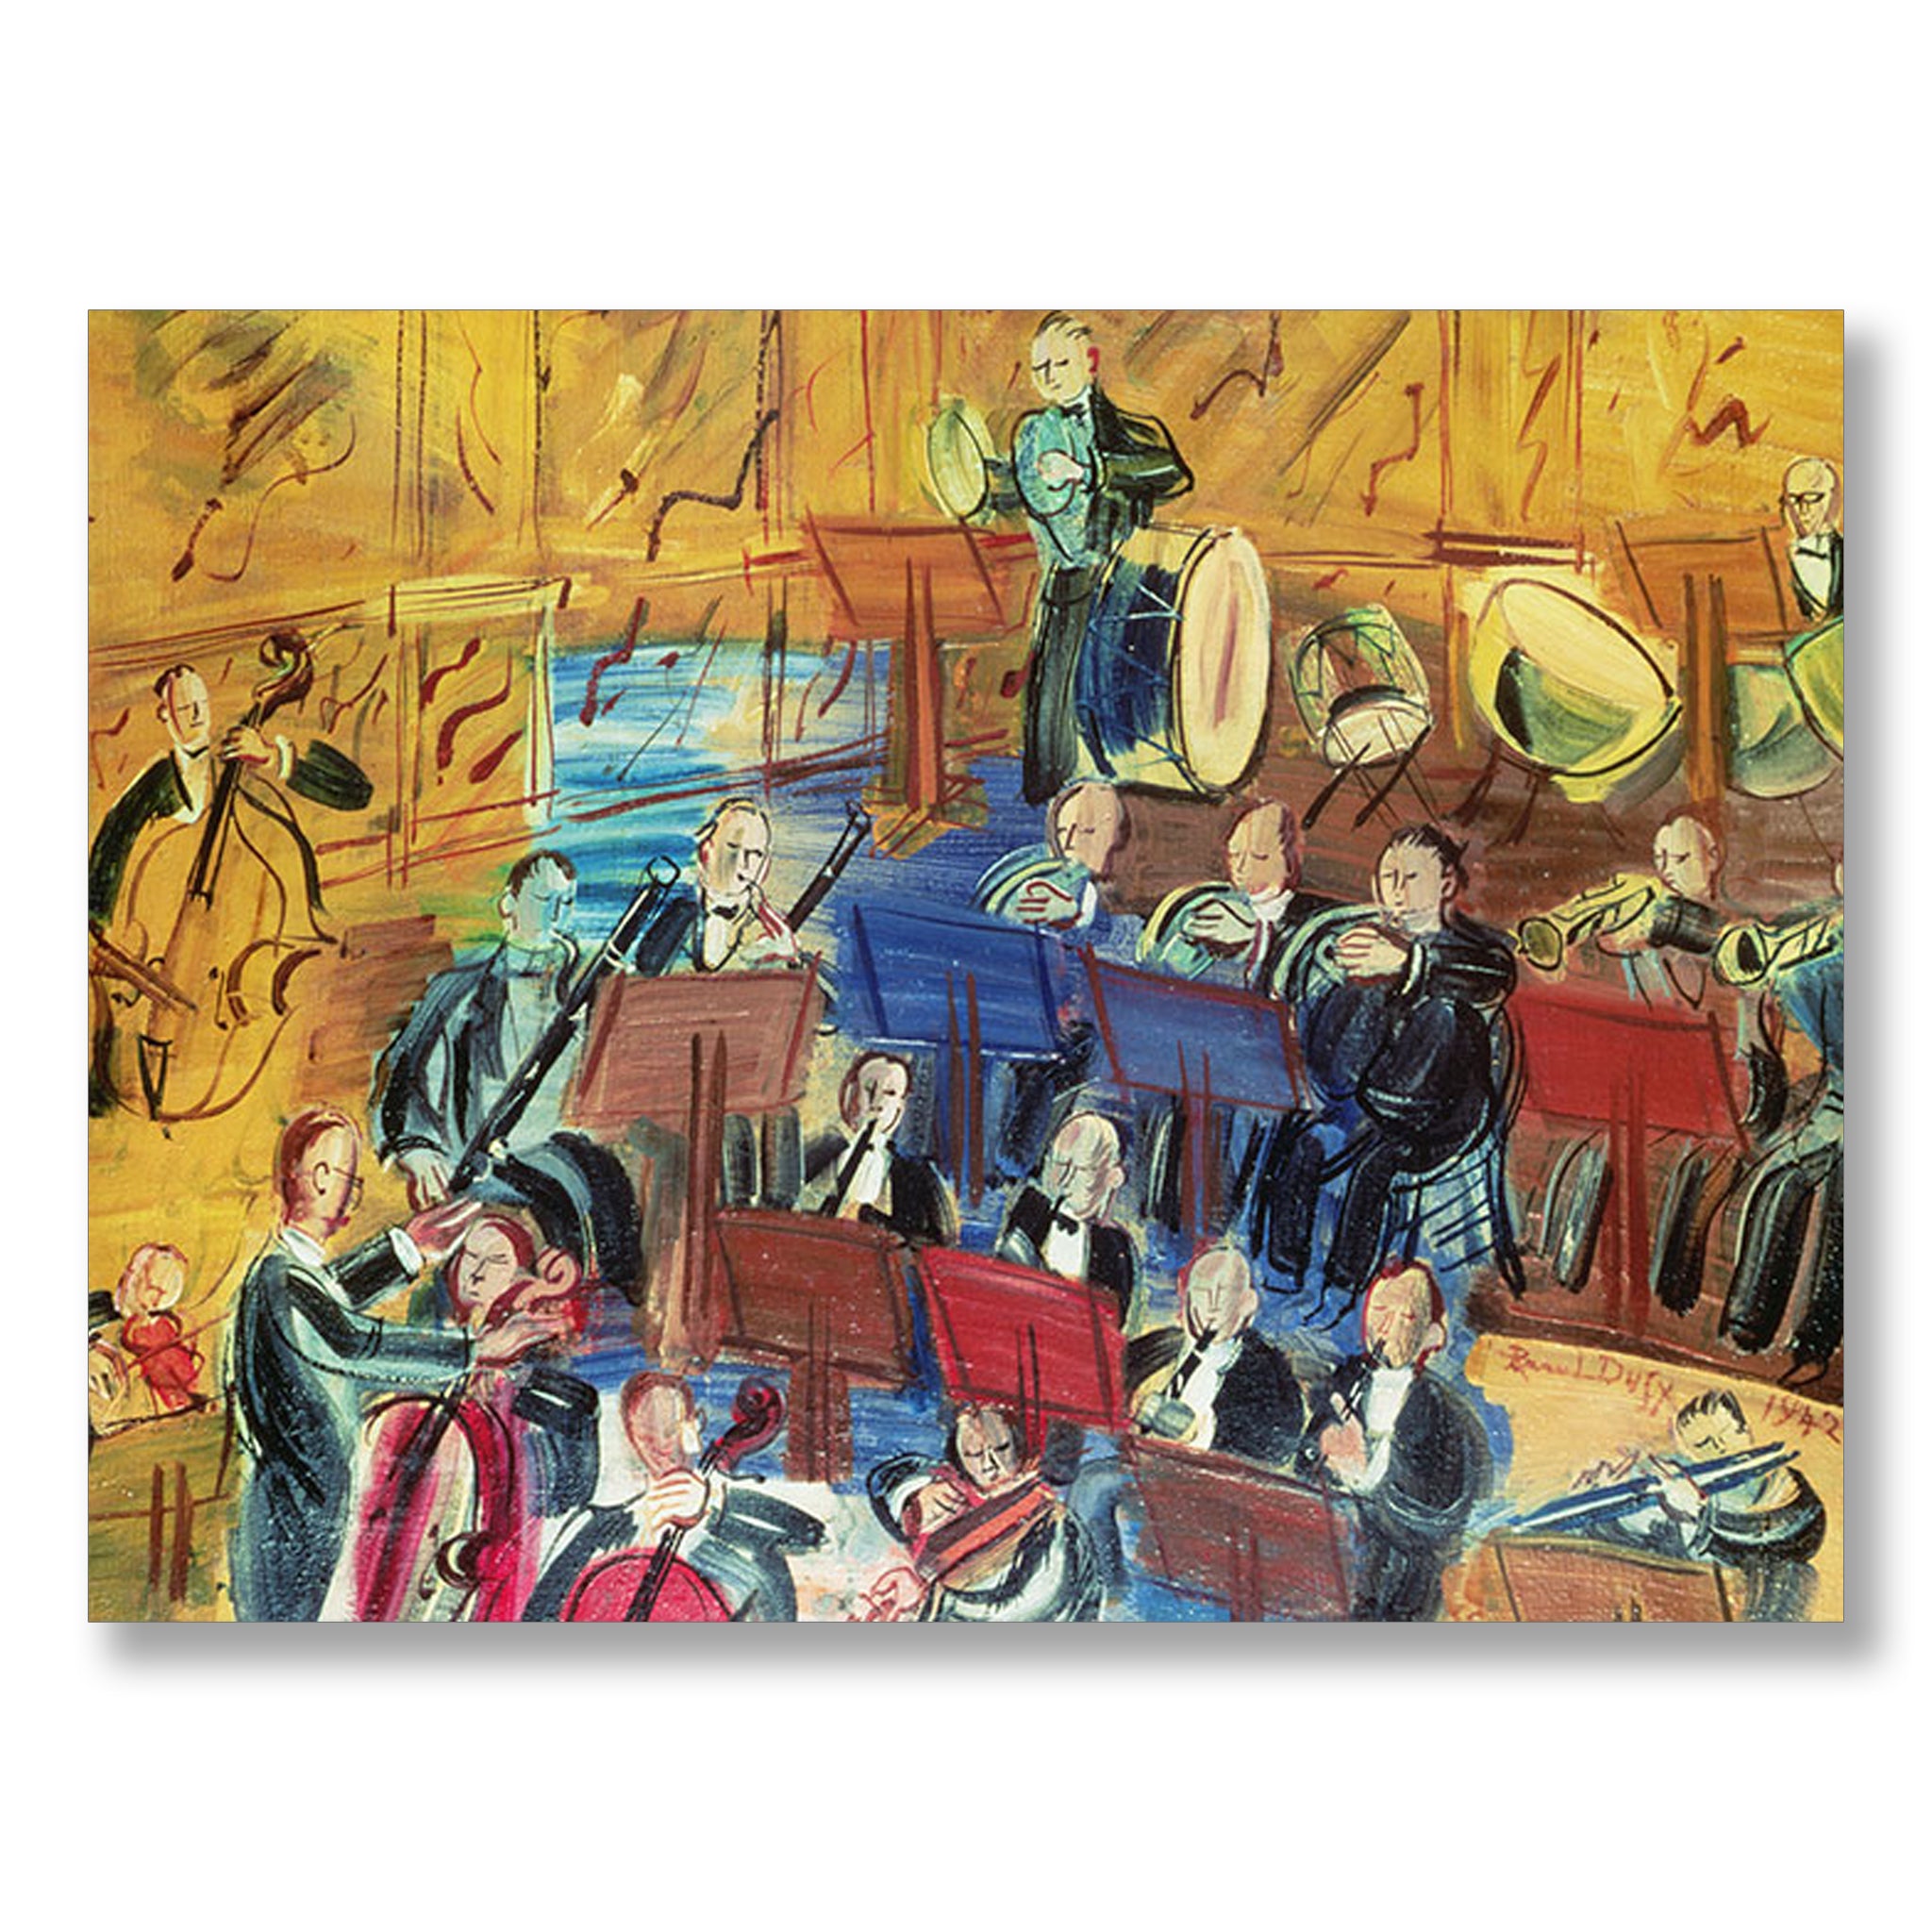 Orchestra by Raoul Dufy